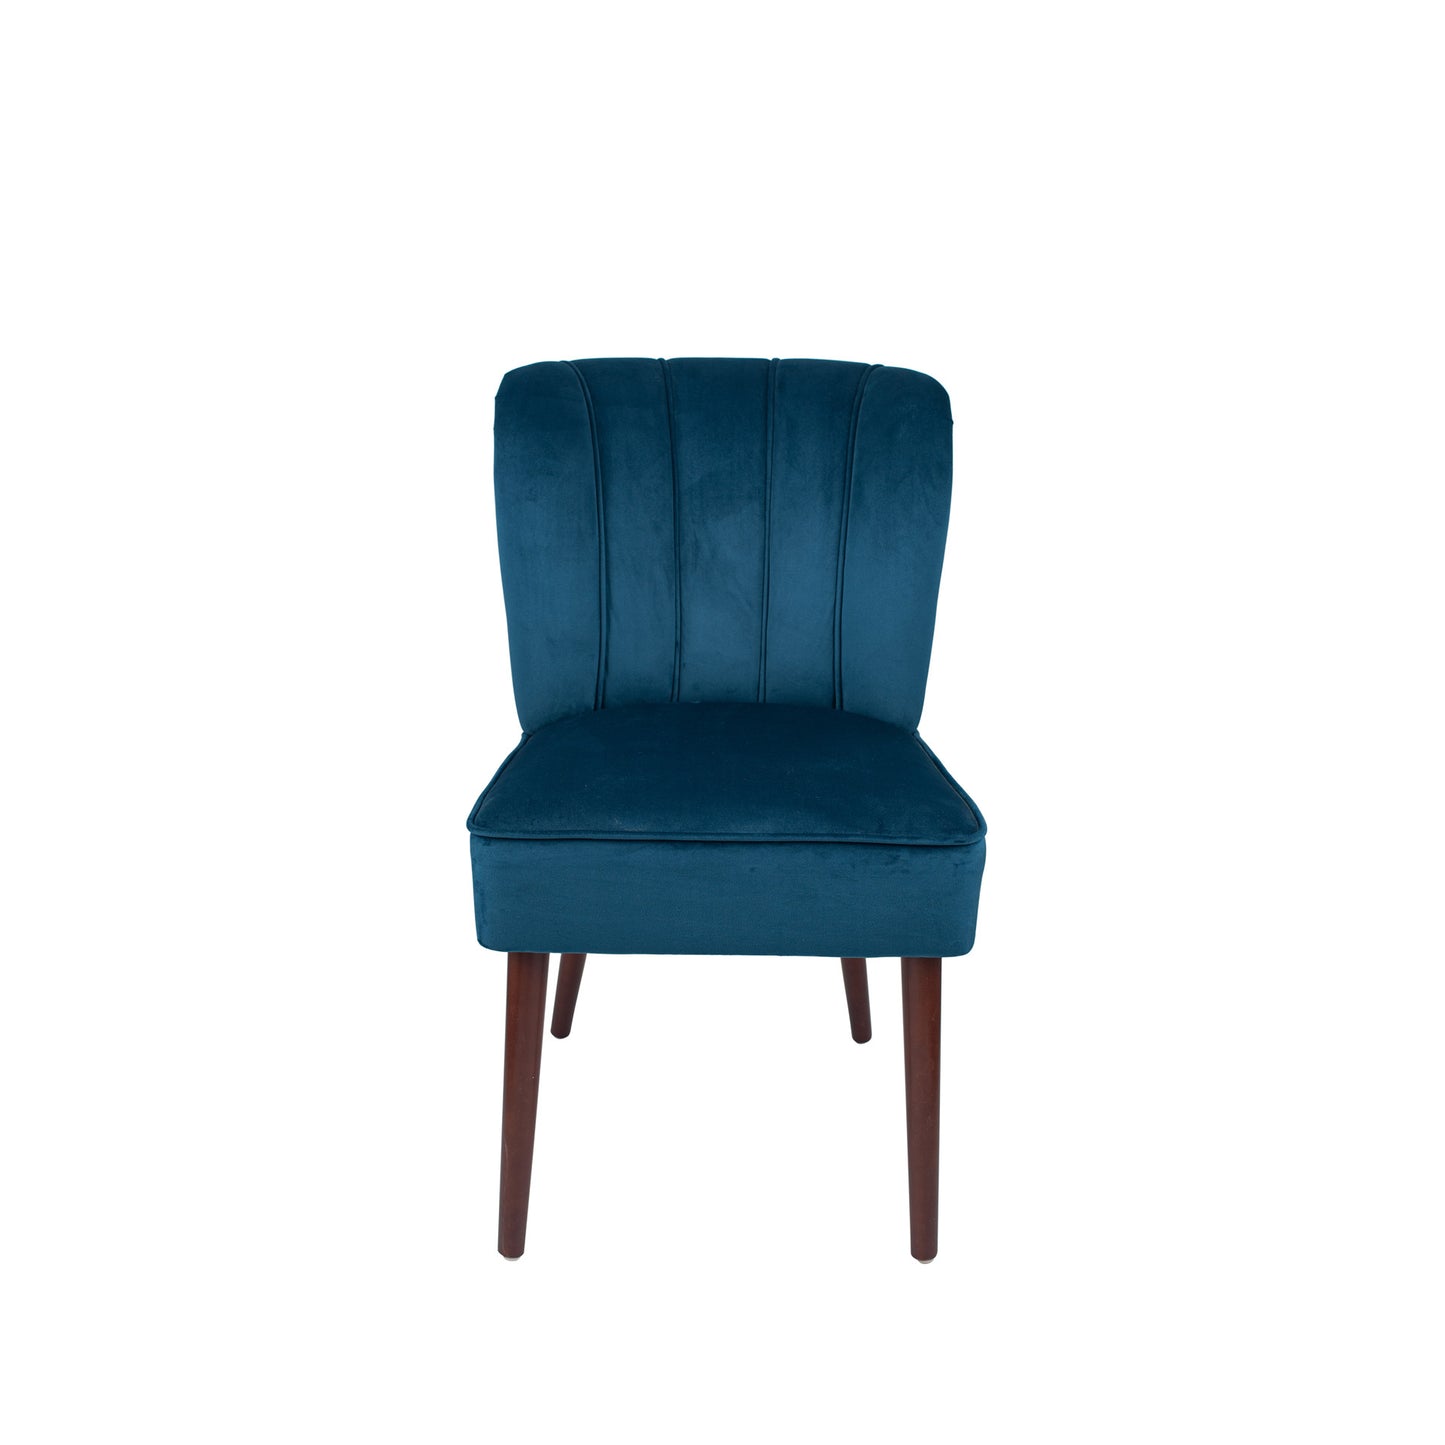 Sapphire Blue Dining Chair With Walnut Effect Legs